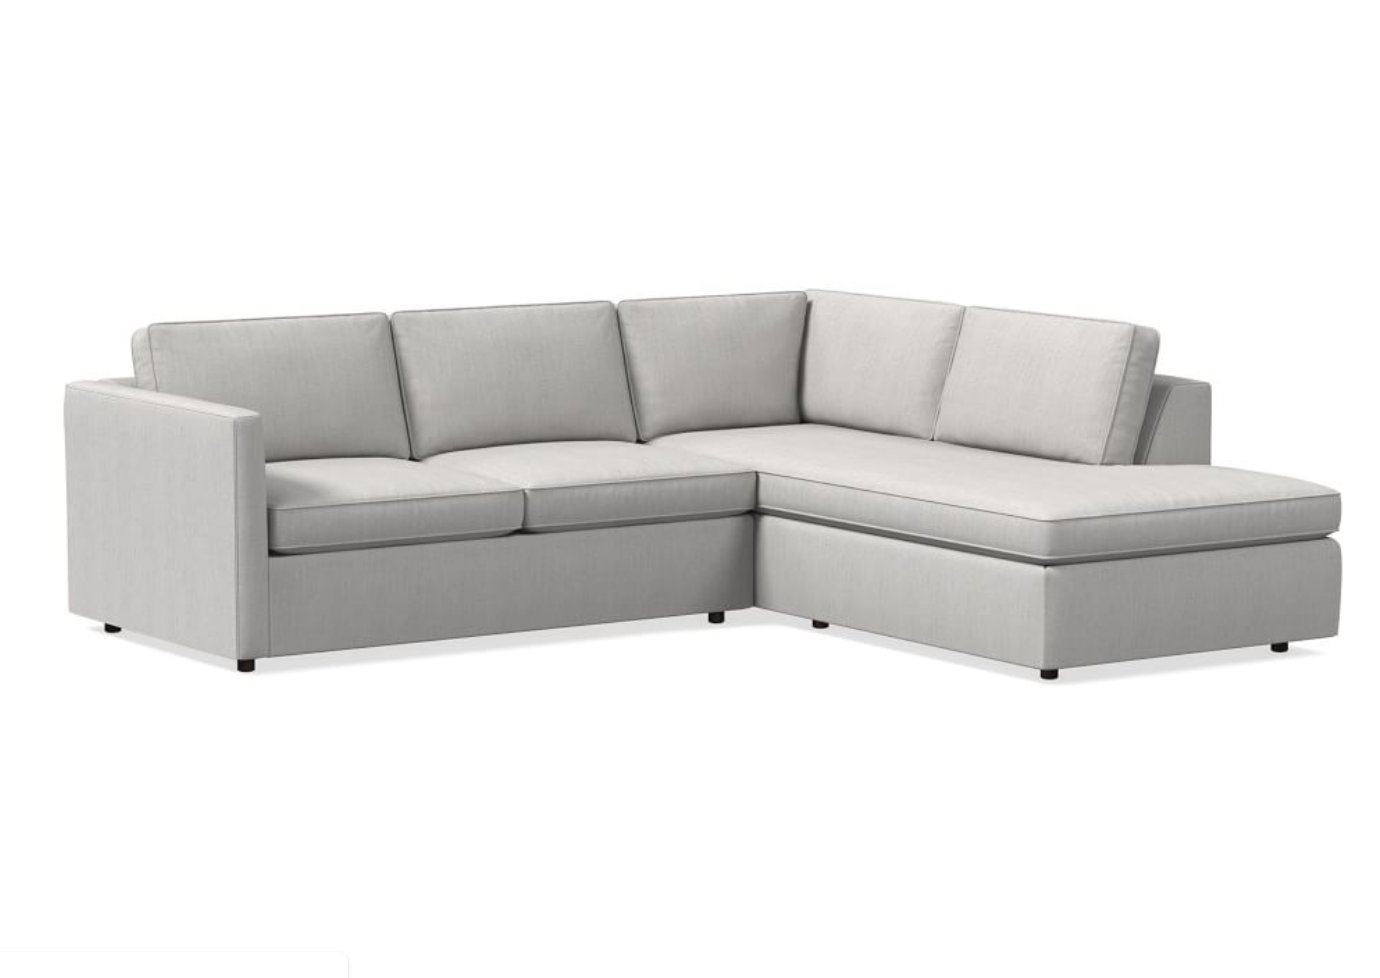 Harris 106" Right Multi Seat 2-Piece Bumper Chaise Sectional, Standard Depth, Yarn Dyed Linen Weave, Frost Gray - Image 0